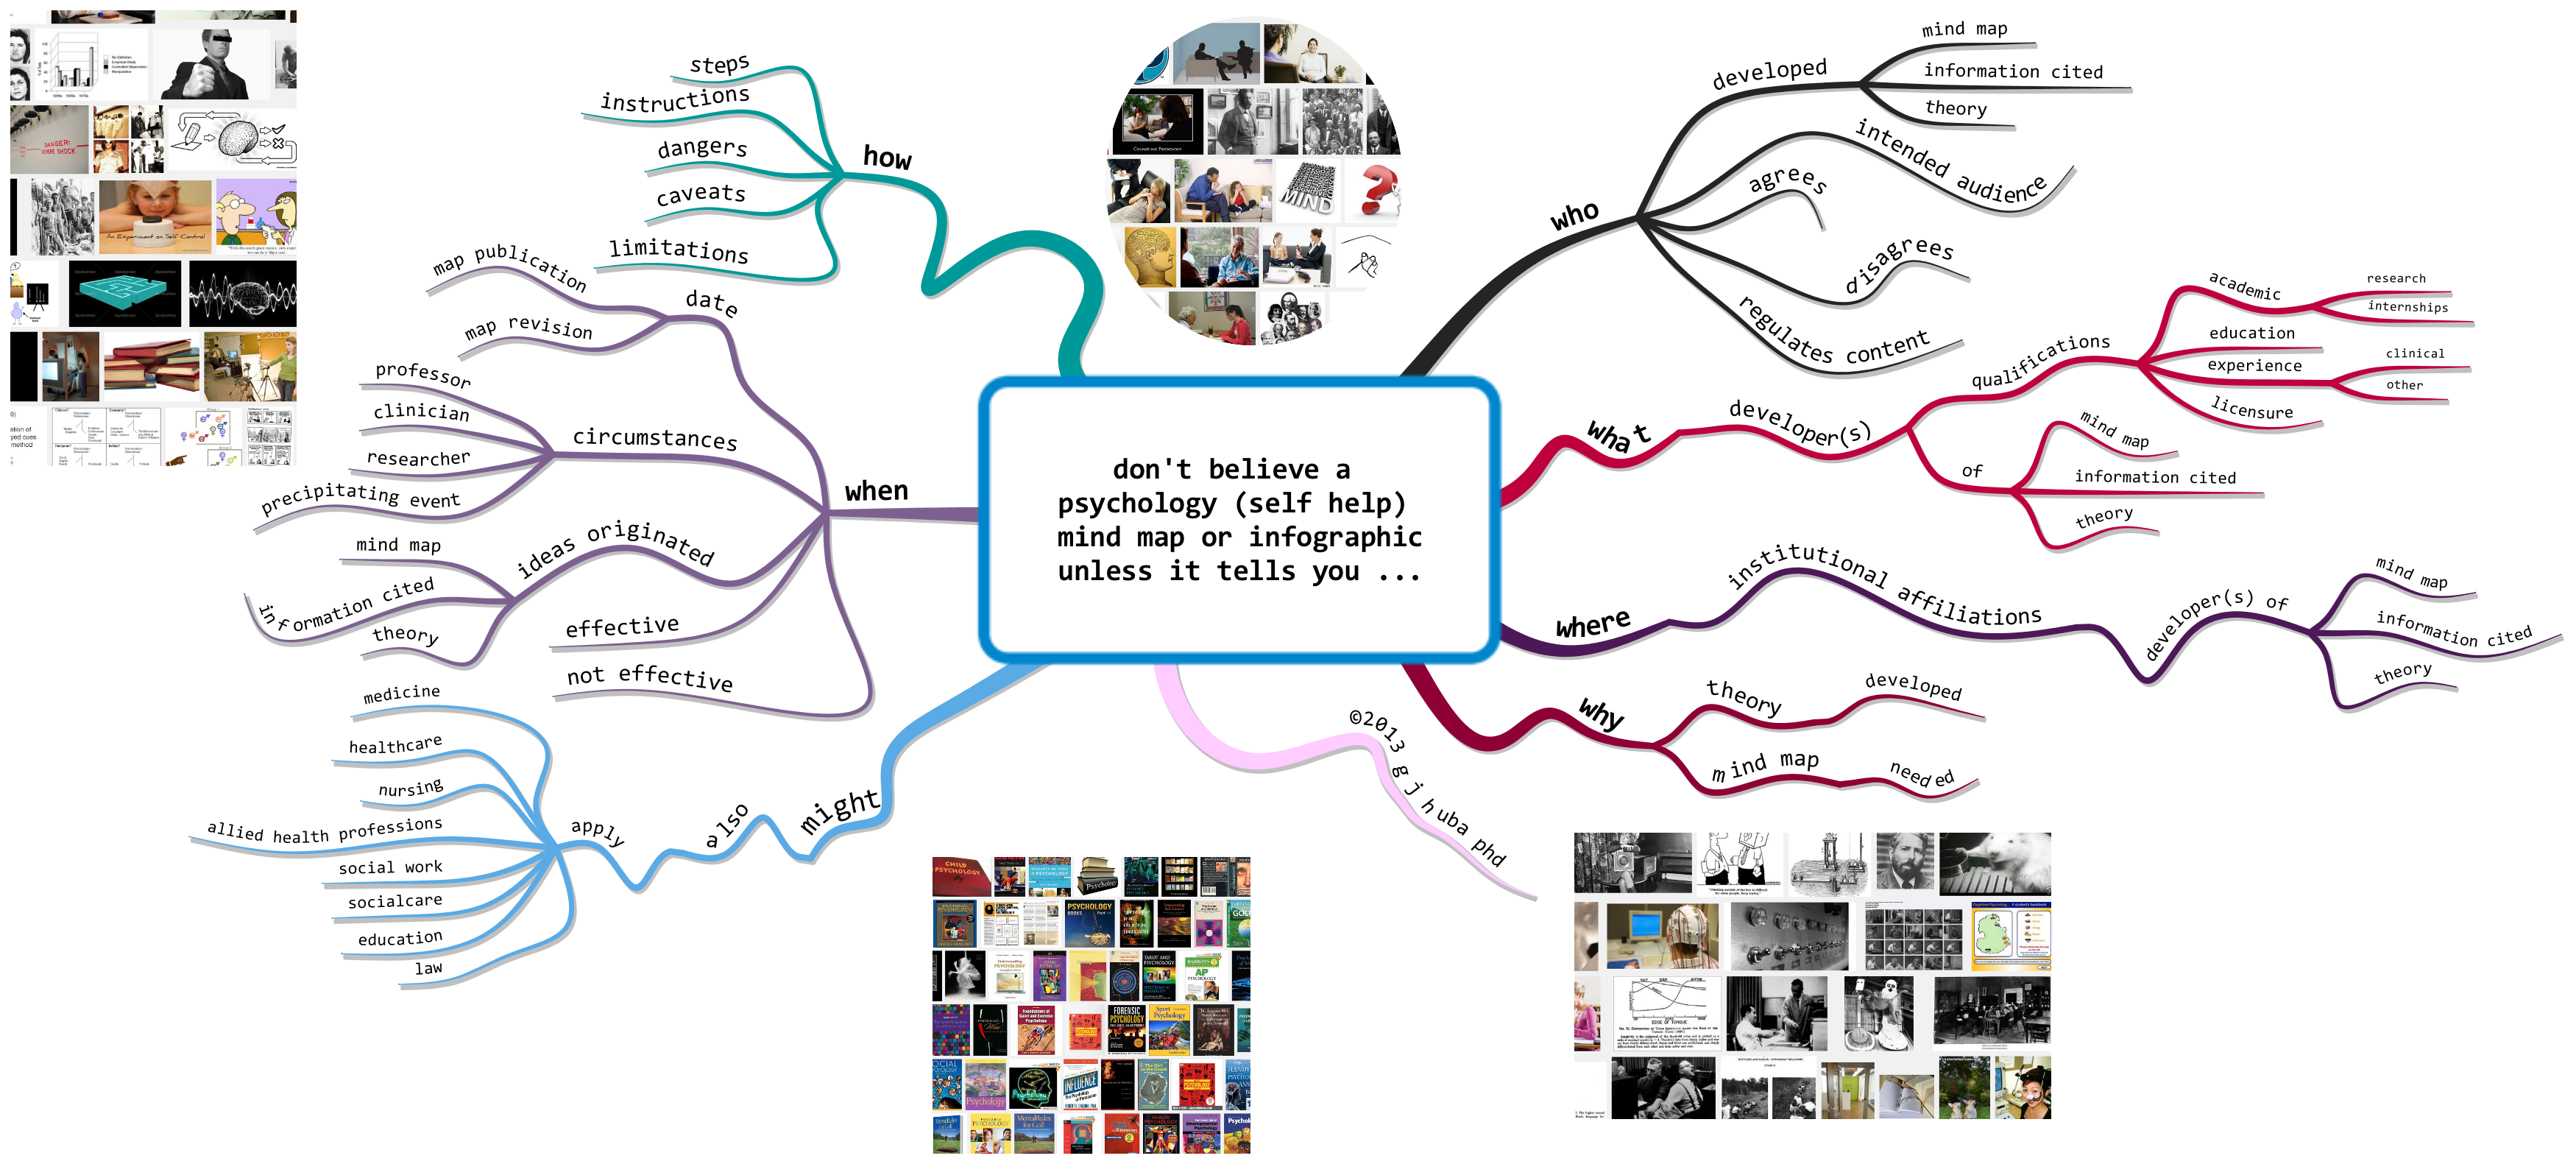 Don't Believe a Psychology (Self Help) Mind Map Unless it Tells You